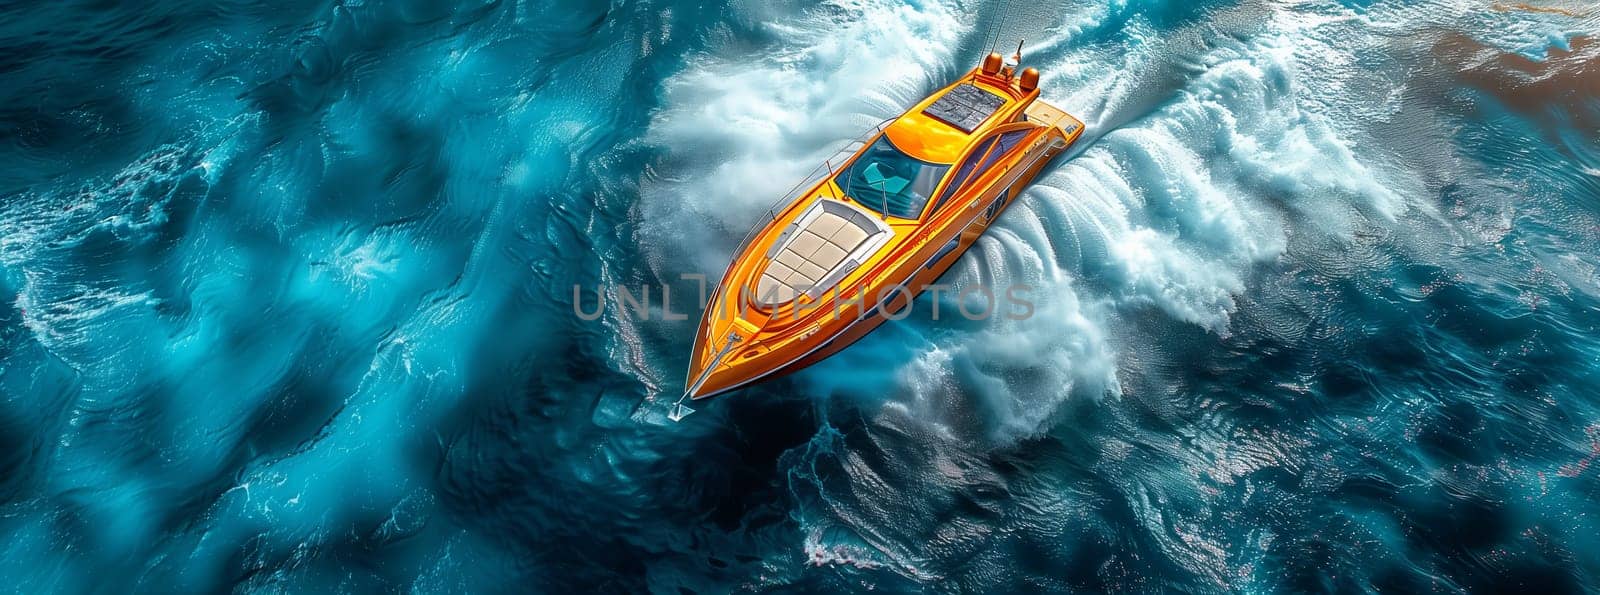 A yellow watercraft is gently floating on the rippling surface of a vast body of liquid, creating a serene and picturesque scene in the marine landscape